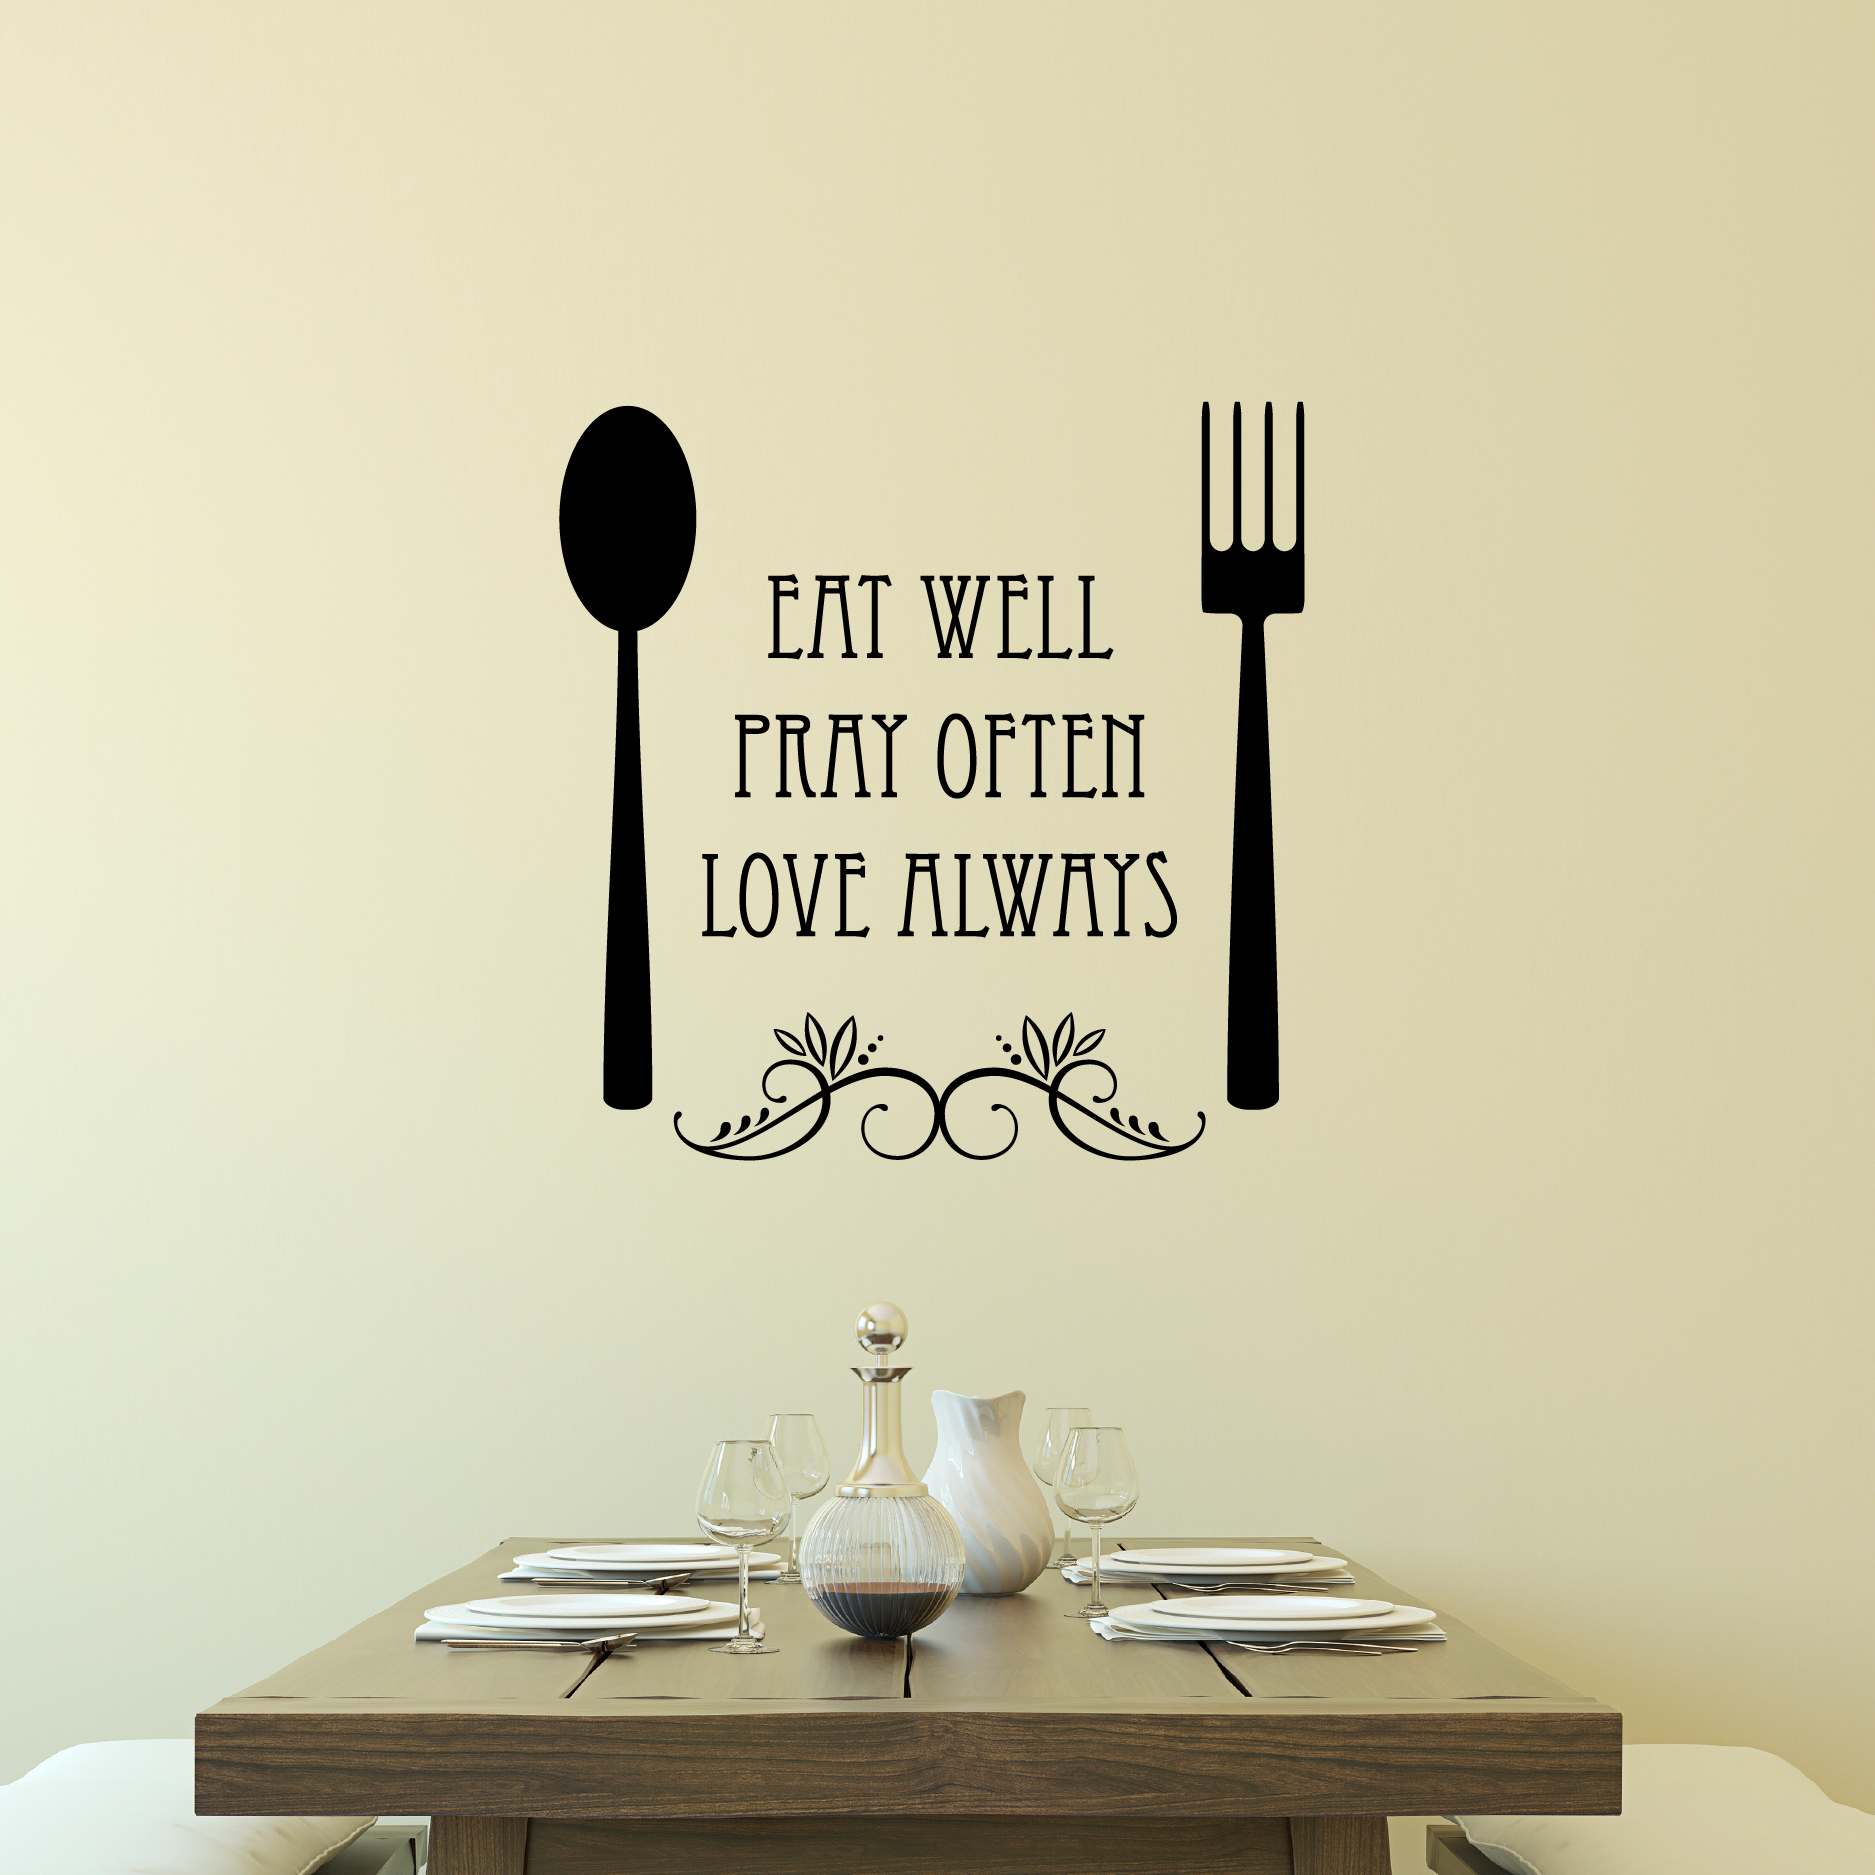 Eat Well Spoon And Fork Wall Quotes™ Decal | WallQuotes.com